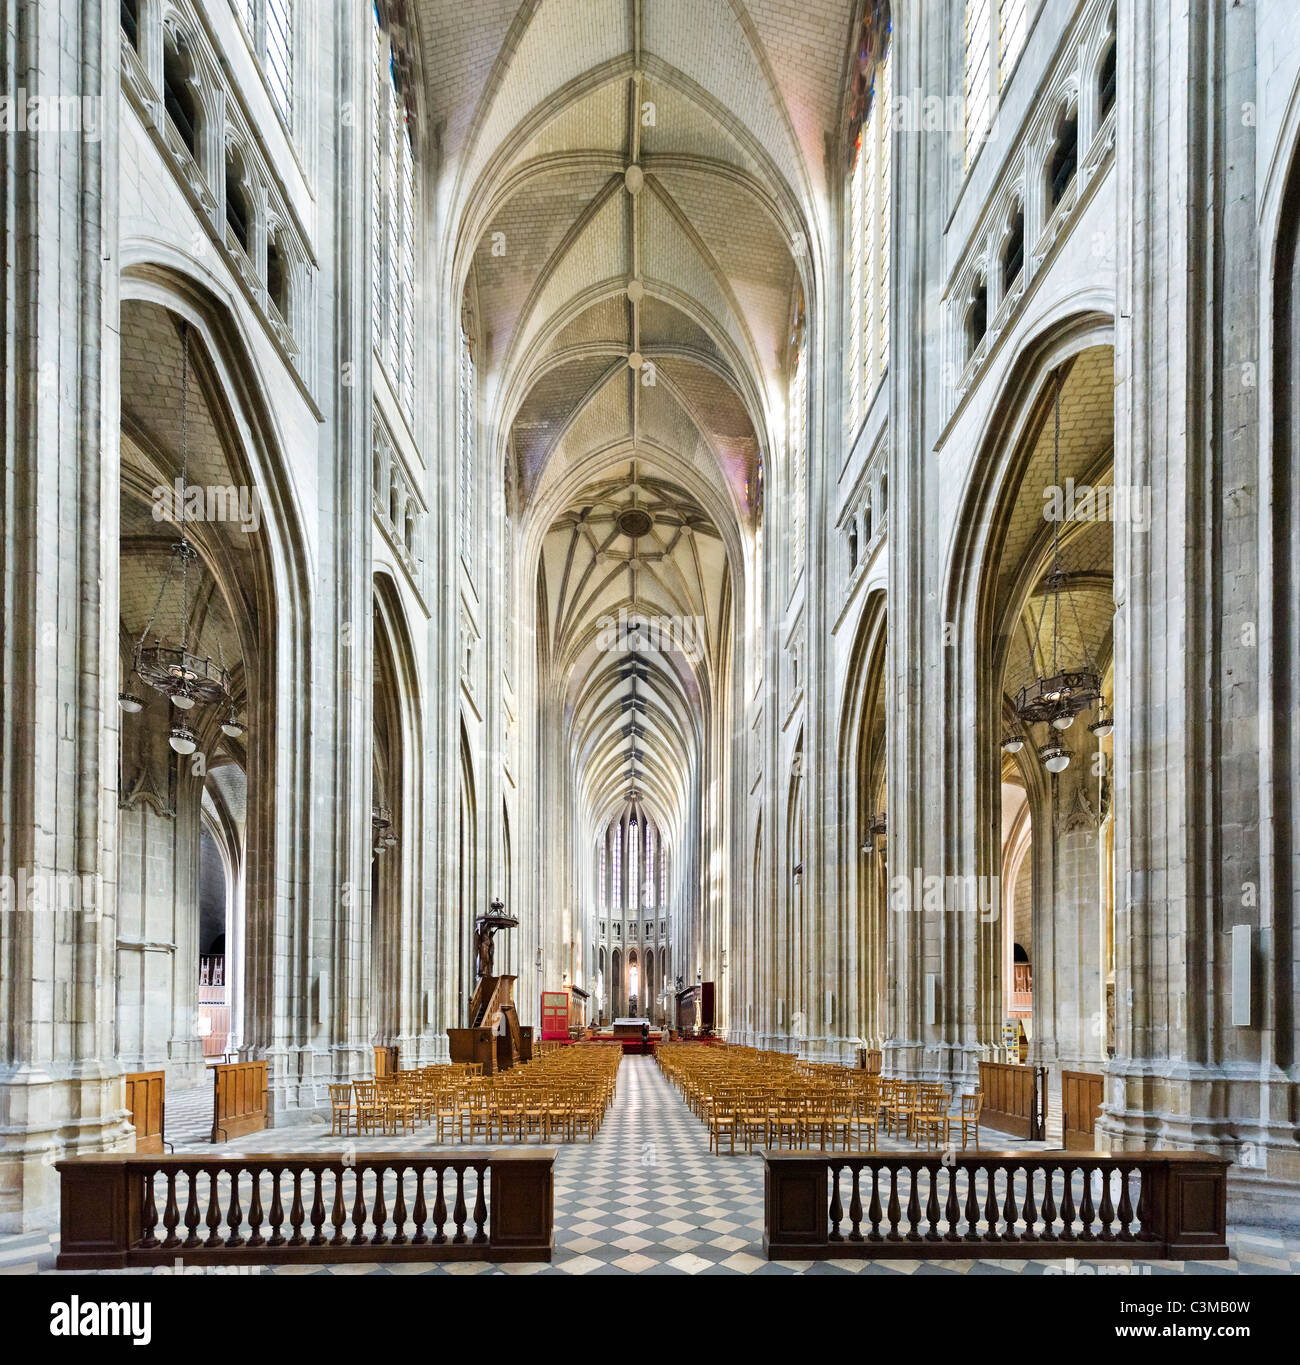 The interior of Orleans Cathedral (Cathedrale Sainte Croix d'Orleans), Orleans, France Stock Photo